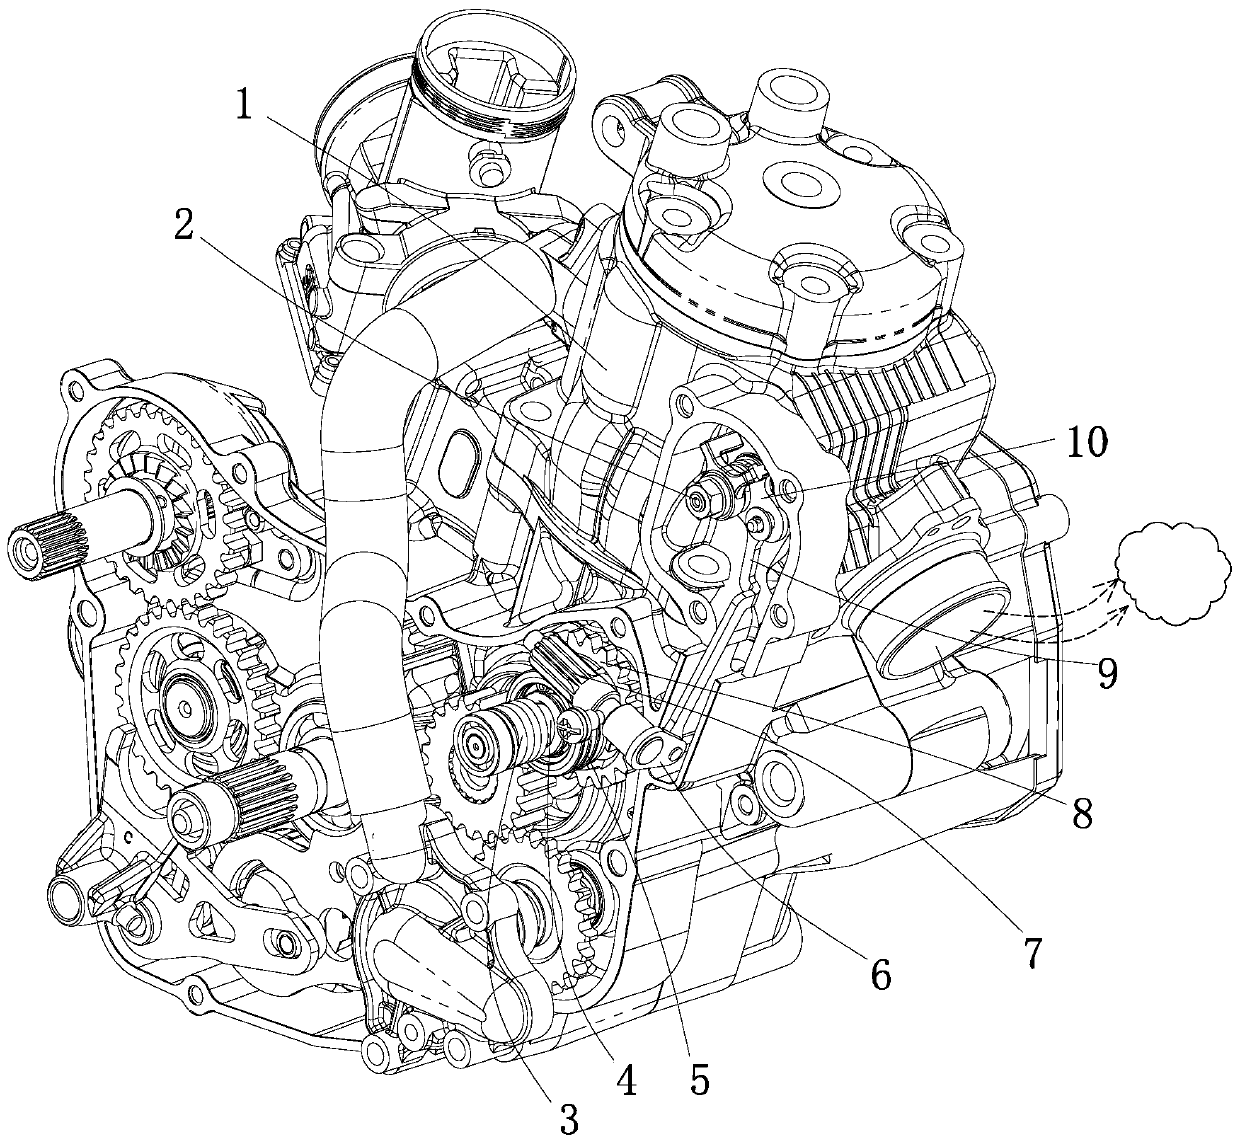 Centrifugal automatic control type variable exhaust valve structure